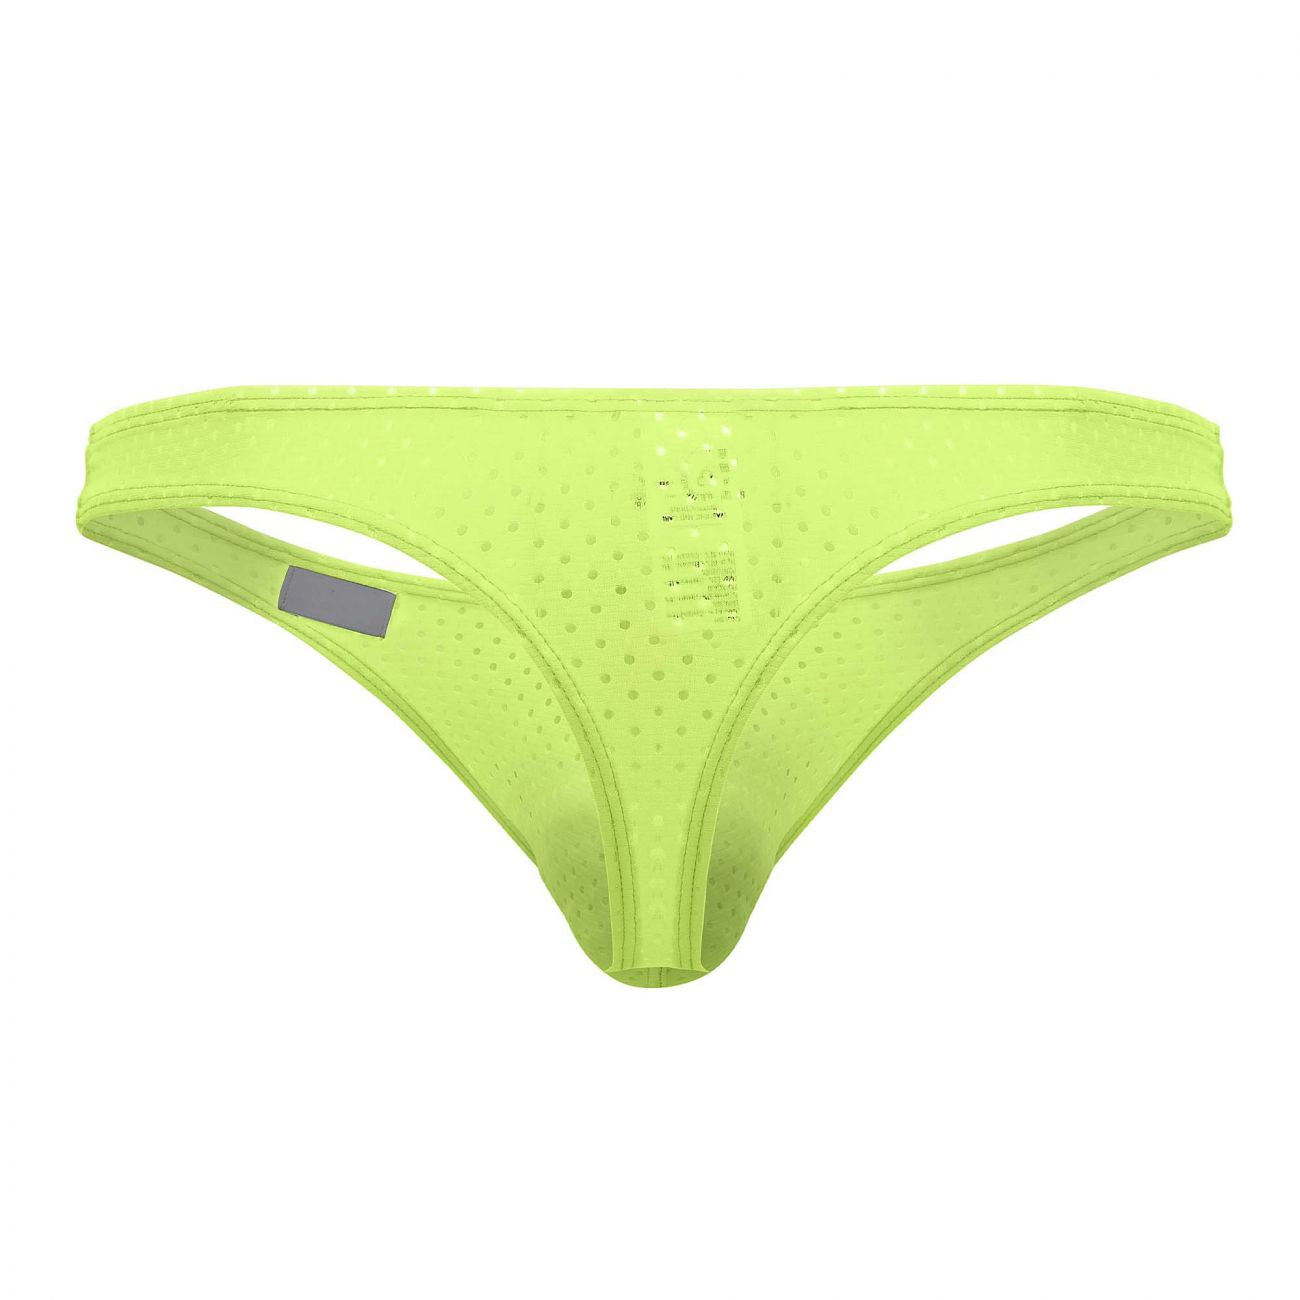 Clever 0930 Solar Thongs Lime Green